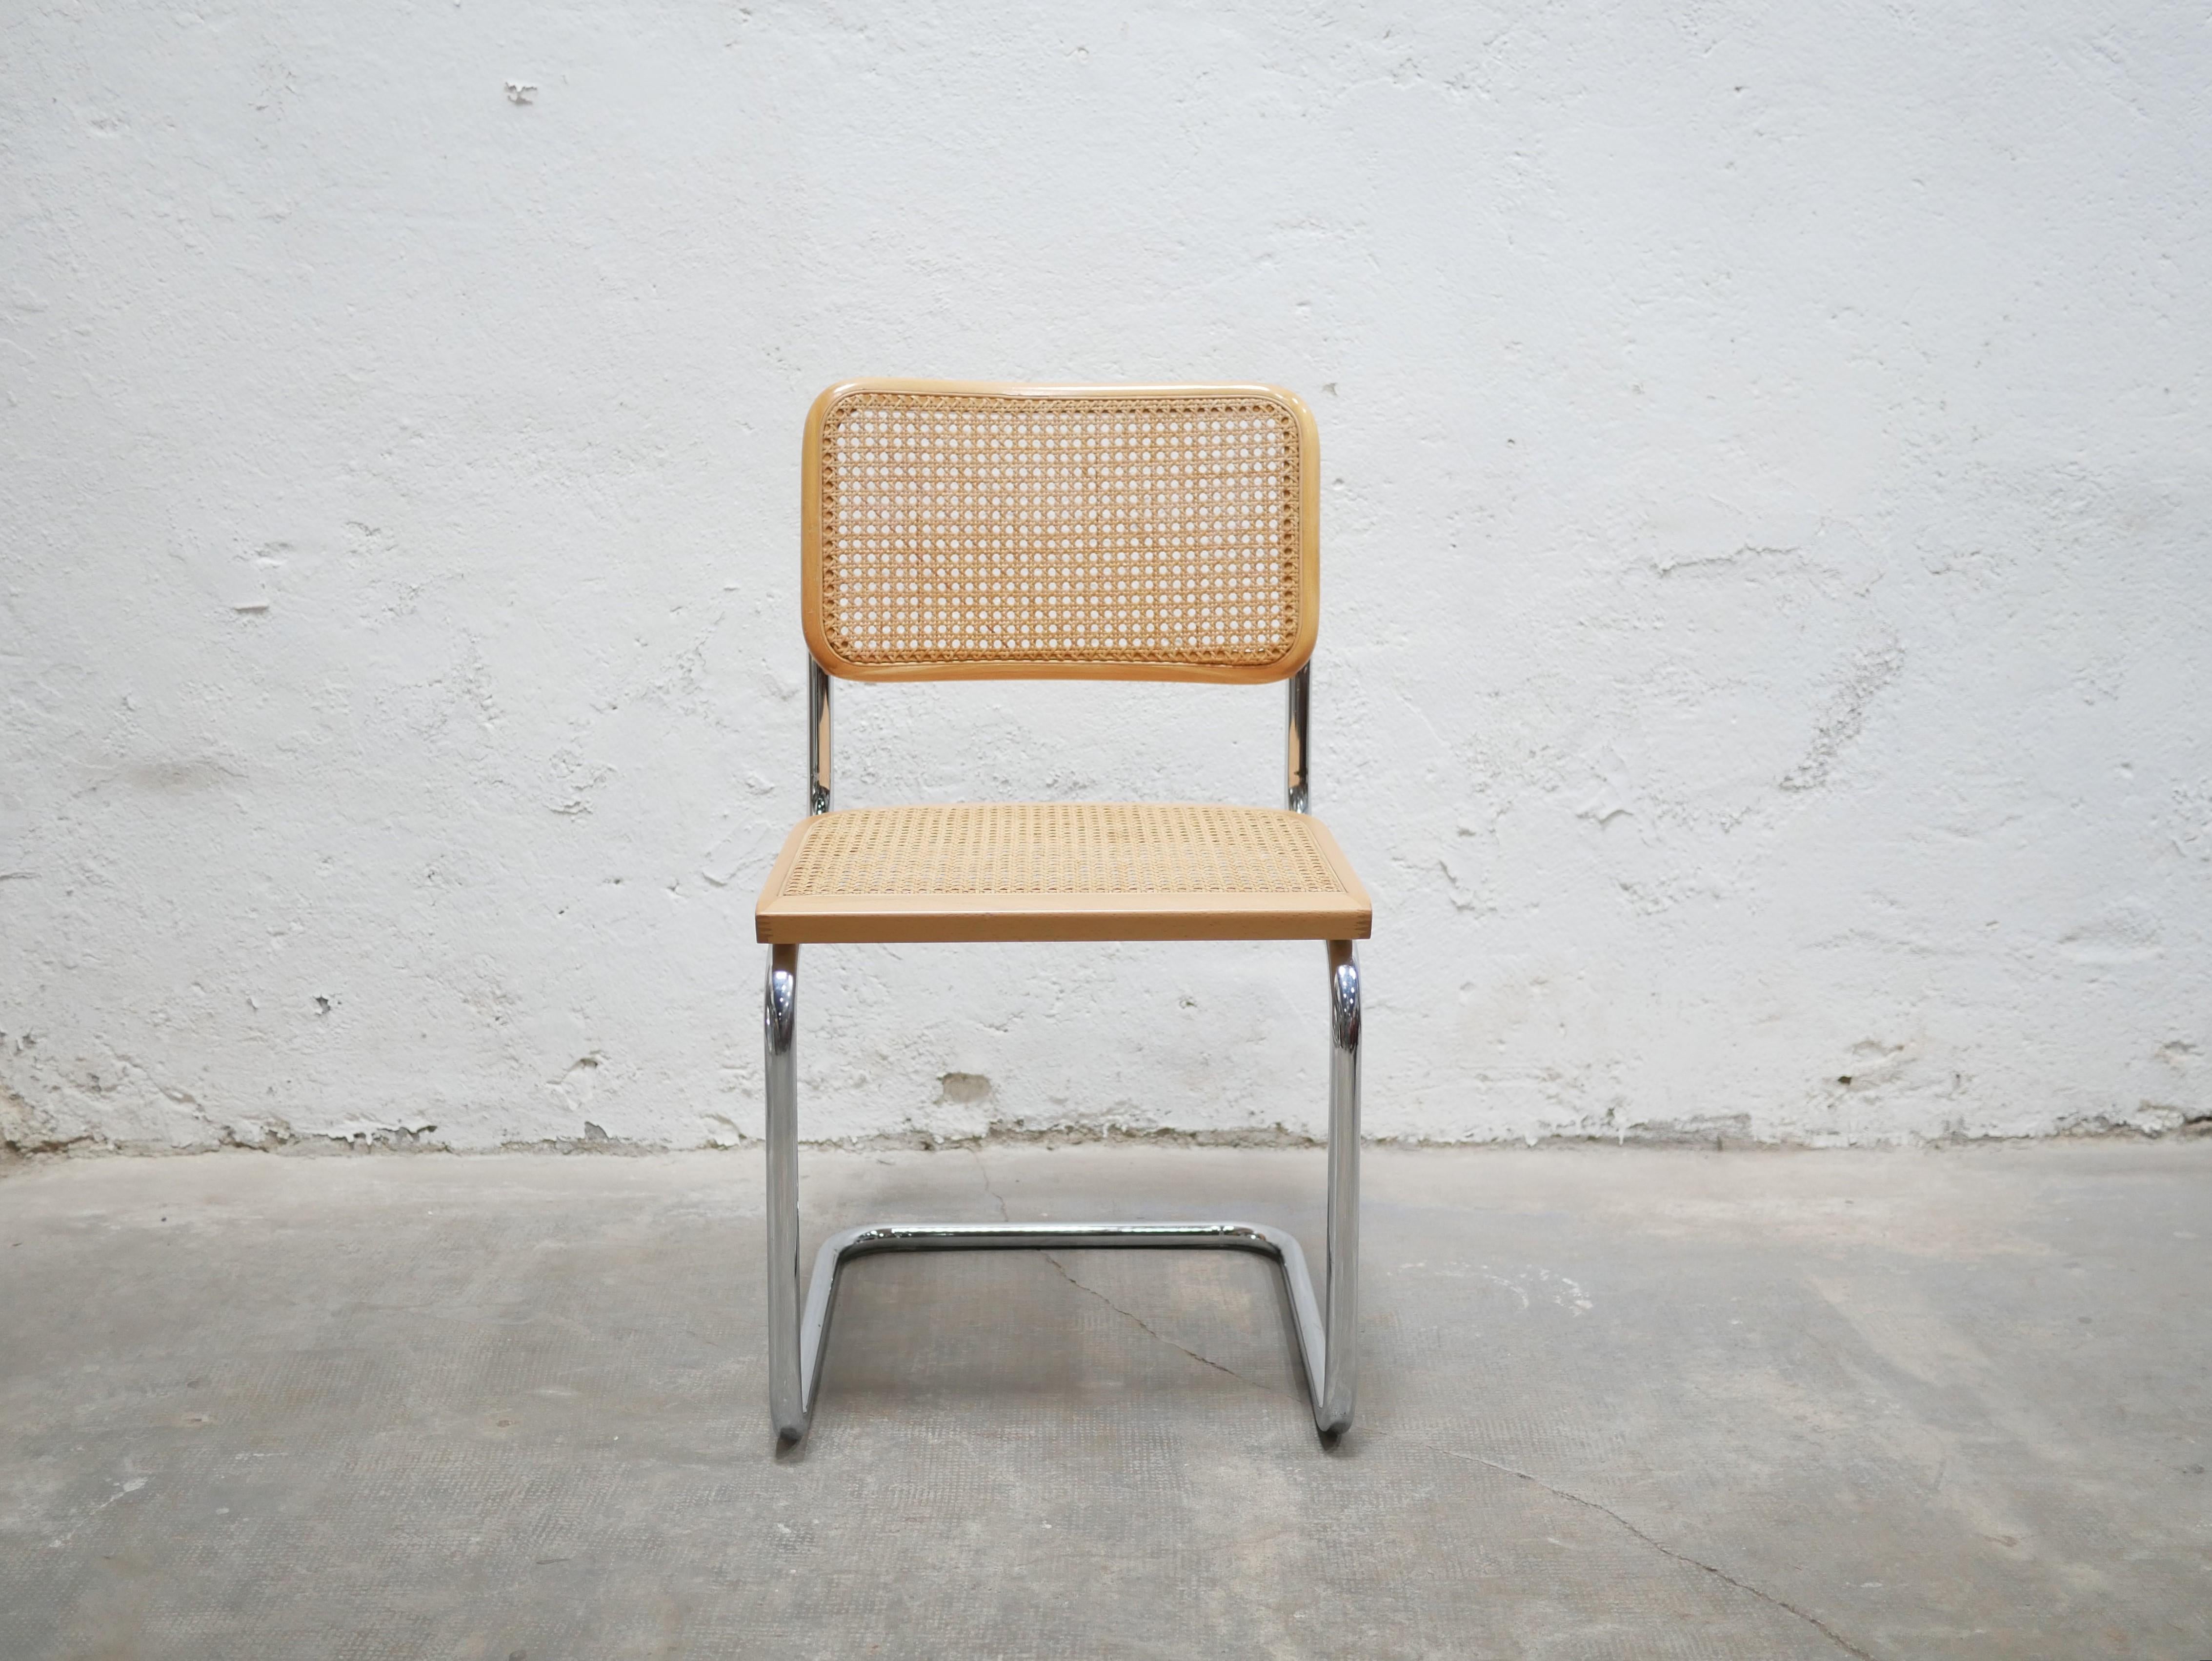 Chair designed by Marcel Breuer, model B32, from the 80s.

Tubular base in chromed steel, caned seat and backrest with natural-coloured wooden structure. This chair is an iconic piece in the history of modernism and Bauhaus. With its timeless